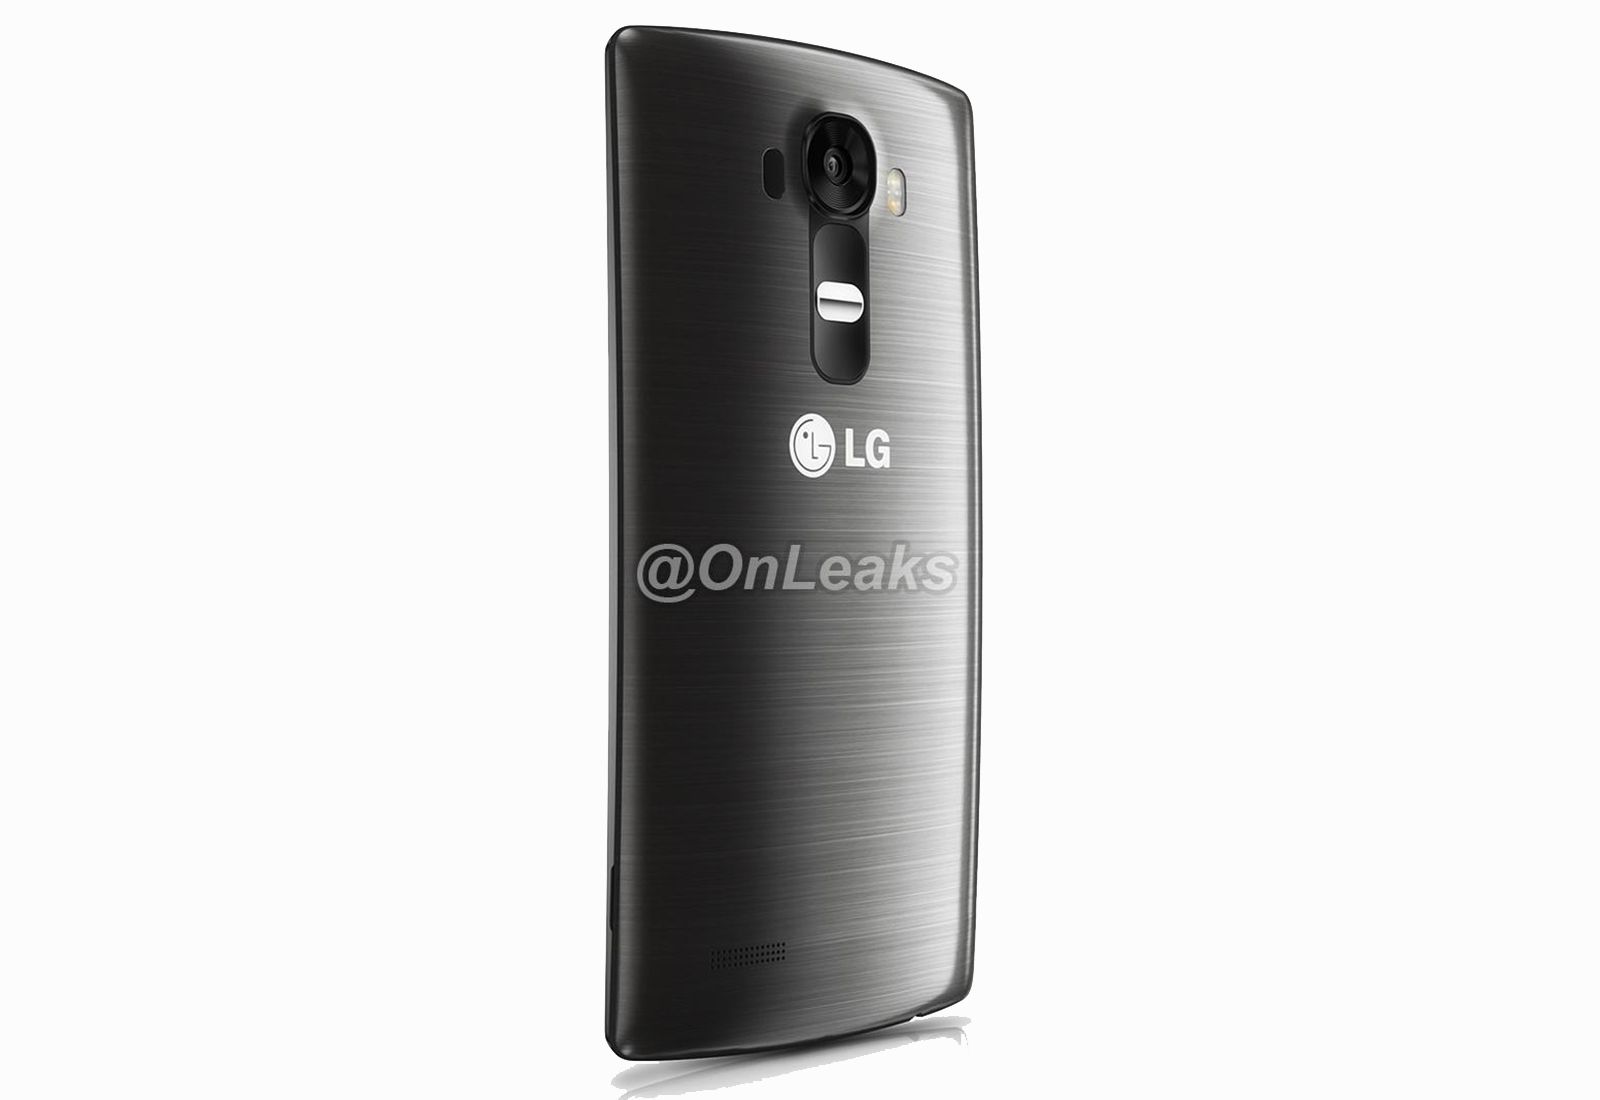 leaked lg g4 images suggests it will have a curved display image 2